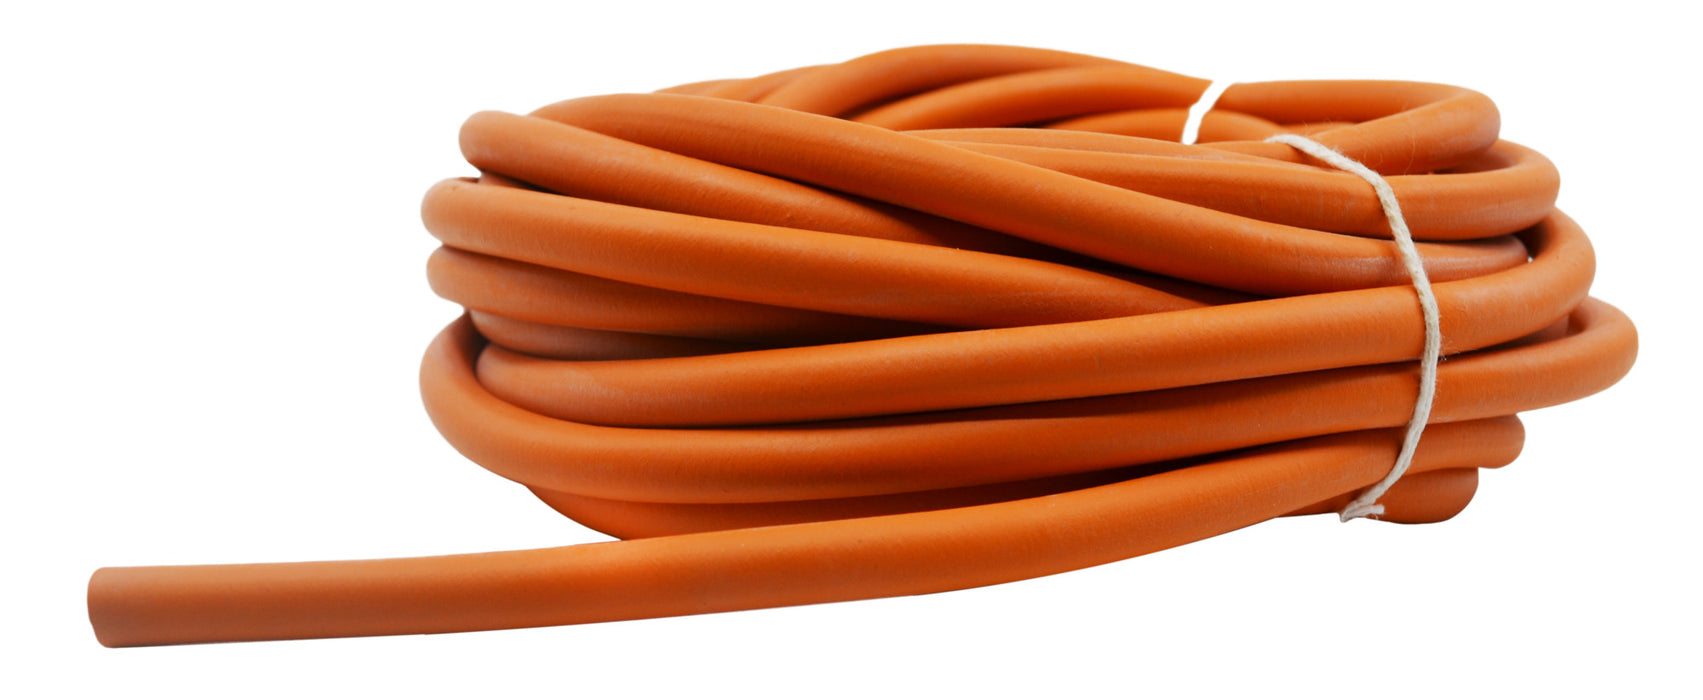 Rubber Tubing, 10m, Orange - Soft - 7mm Bore - 1.5mm Thickness